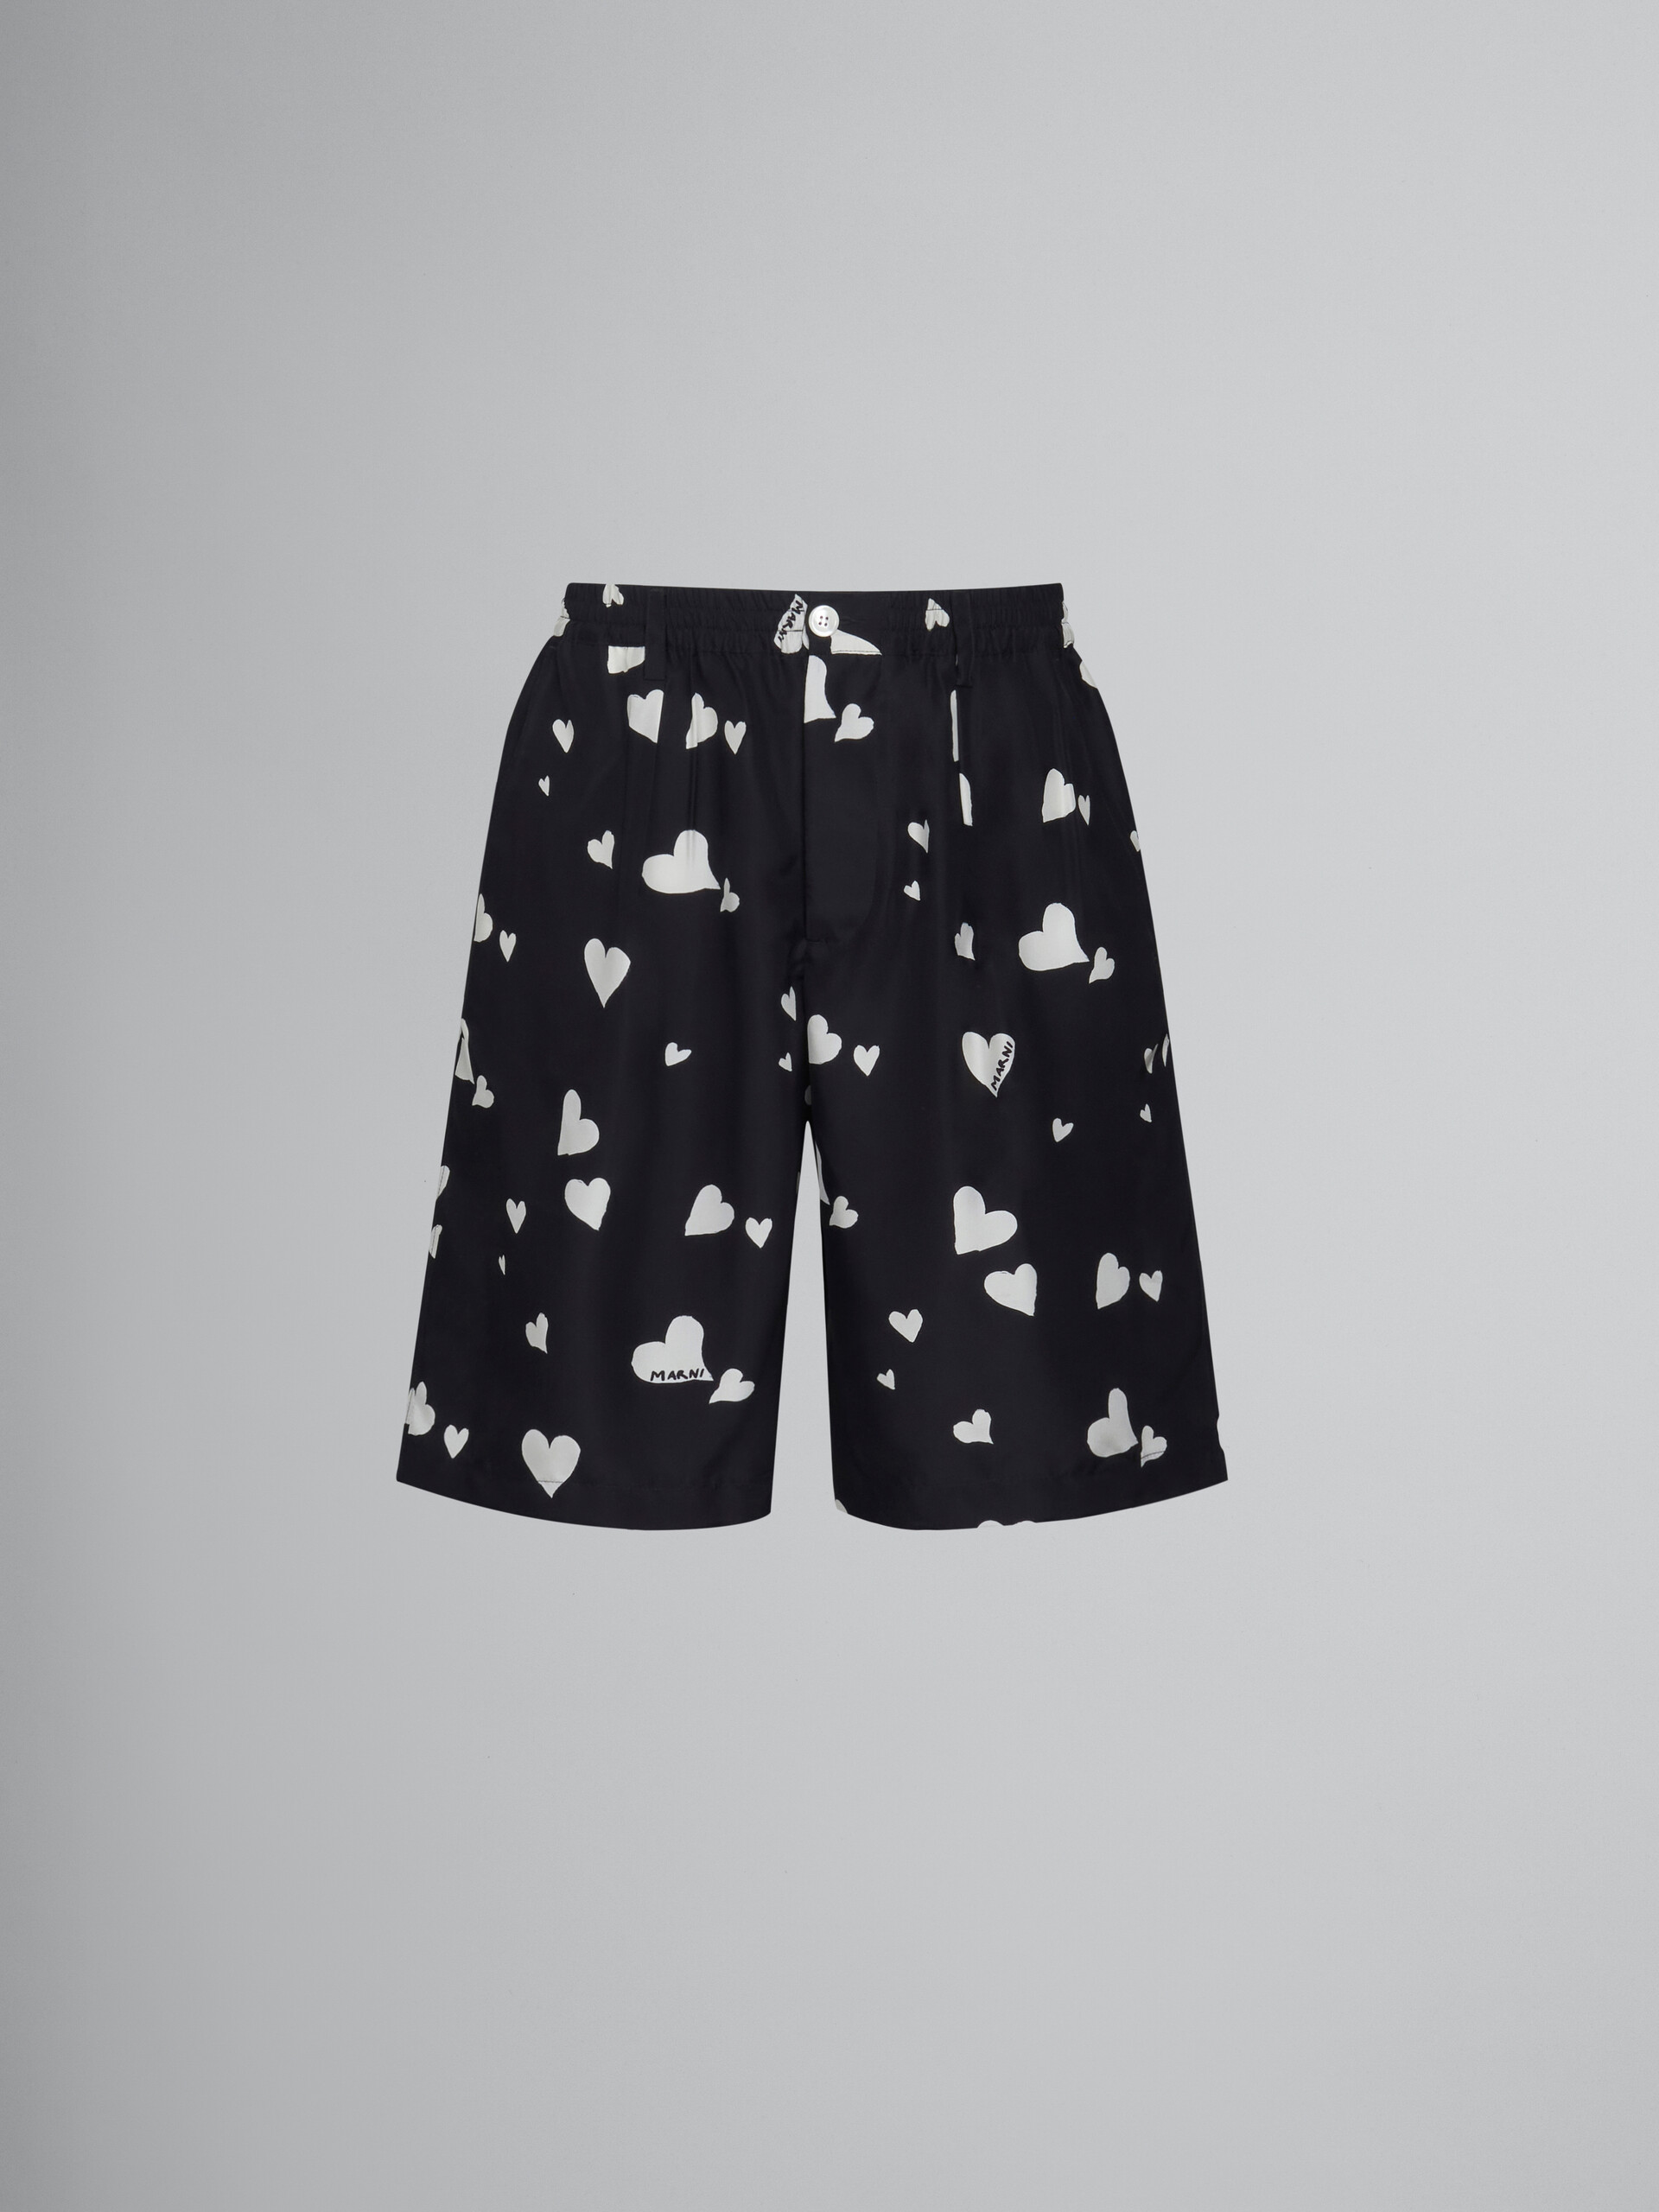 Black silk shorts with Bunch of Hearts print - Pants - Image 1